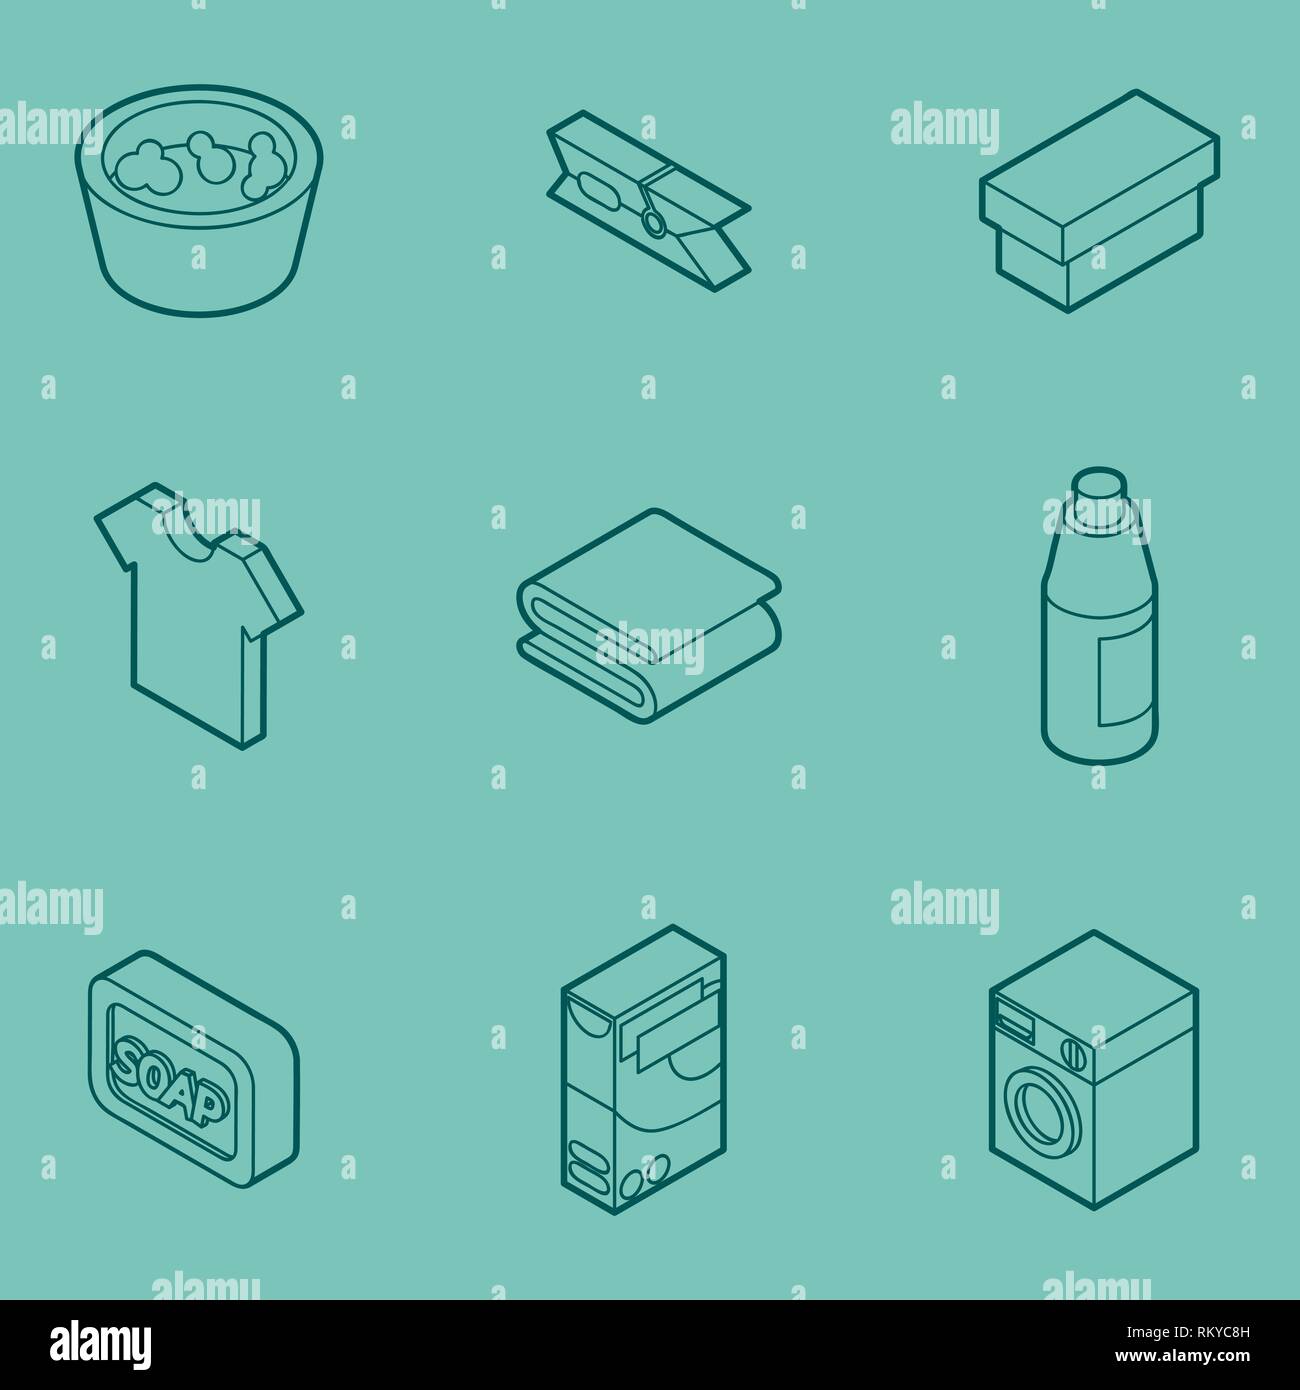 Laundry flat outline isometric icons. Vector illustration, EPS 10 Stock Vector